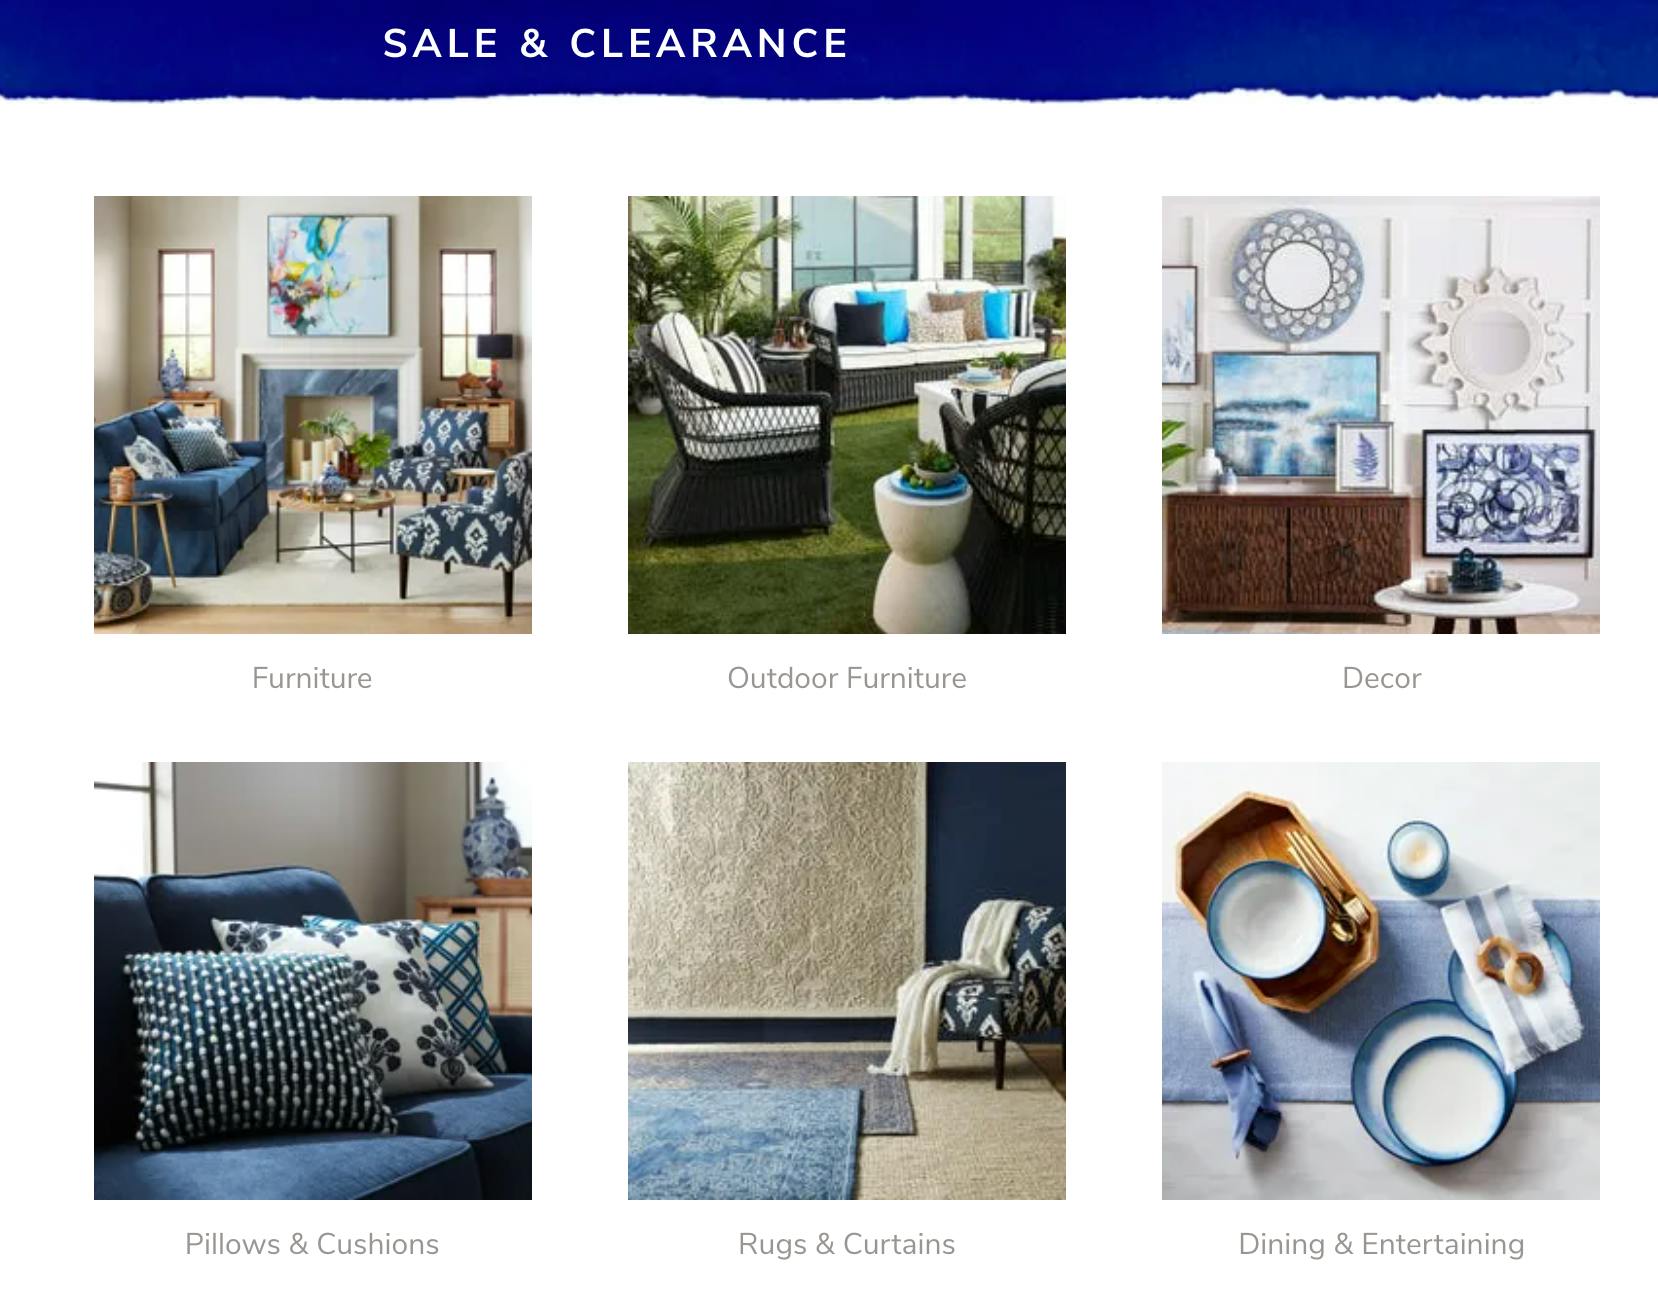 pier 1 website showing categories of products during closeout time